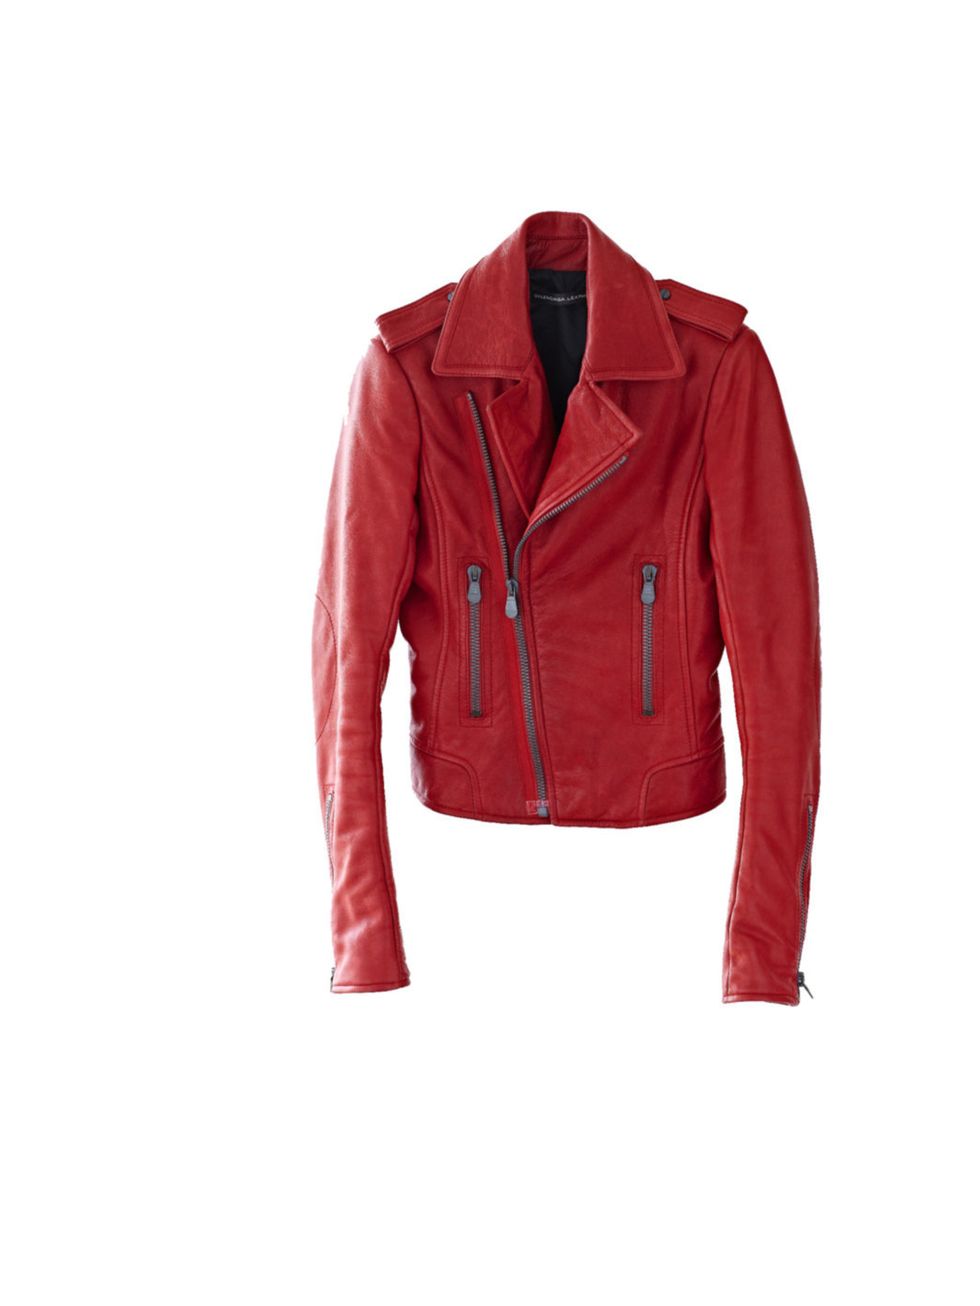 <p>Balenciaga red leather jacket, was £1,535 now £1,030, at <a href="http://www.vestiairecollective.com/biker--rouge-balenciaga.shtml">Vestiaire Collective</a></p>